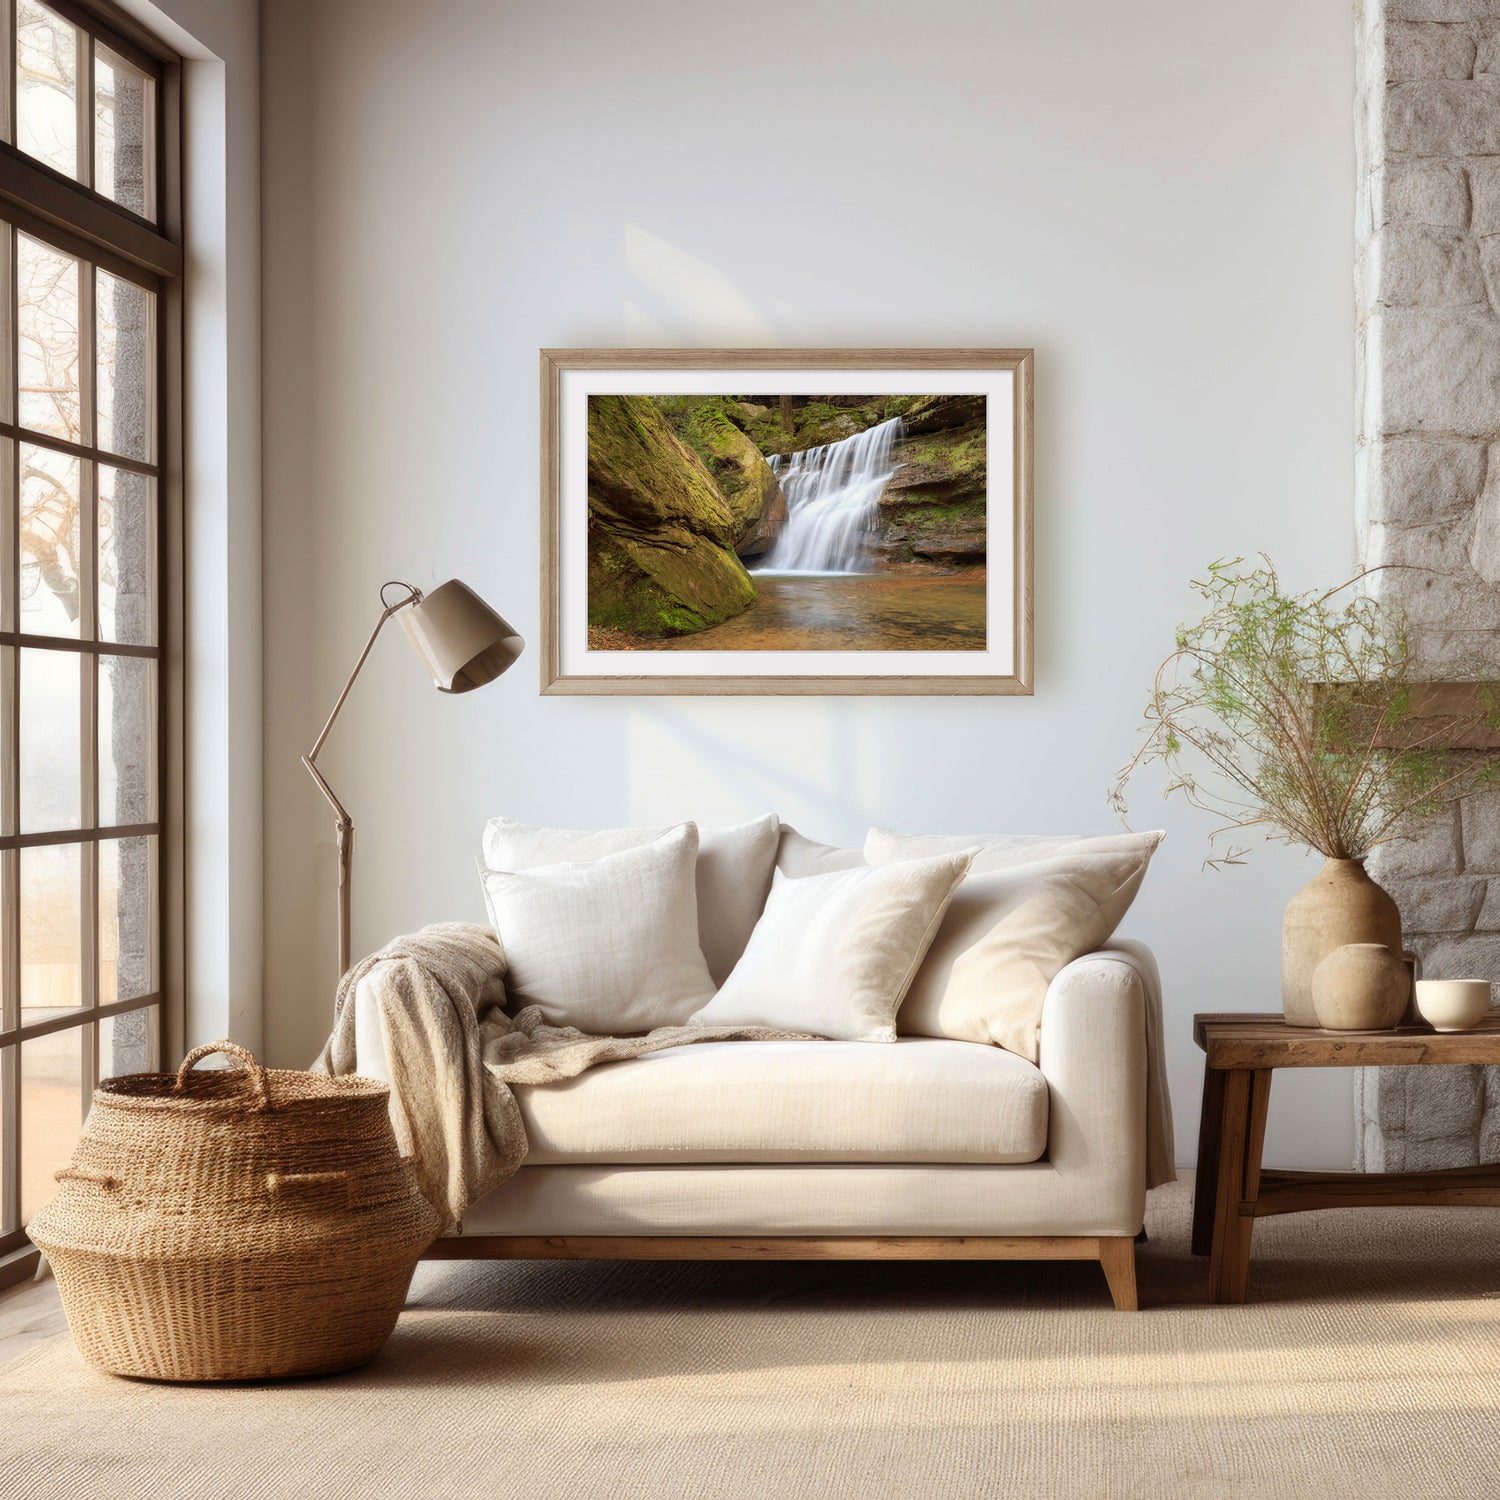 Tranquil waterfall scene from Hocking Hills, Ohio, beautifully captured in high-quality wall art, showcasing the serene flow of water through a vibrant, green forest."